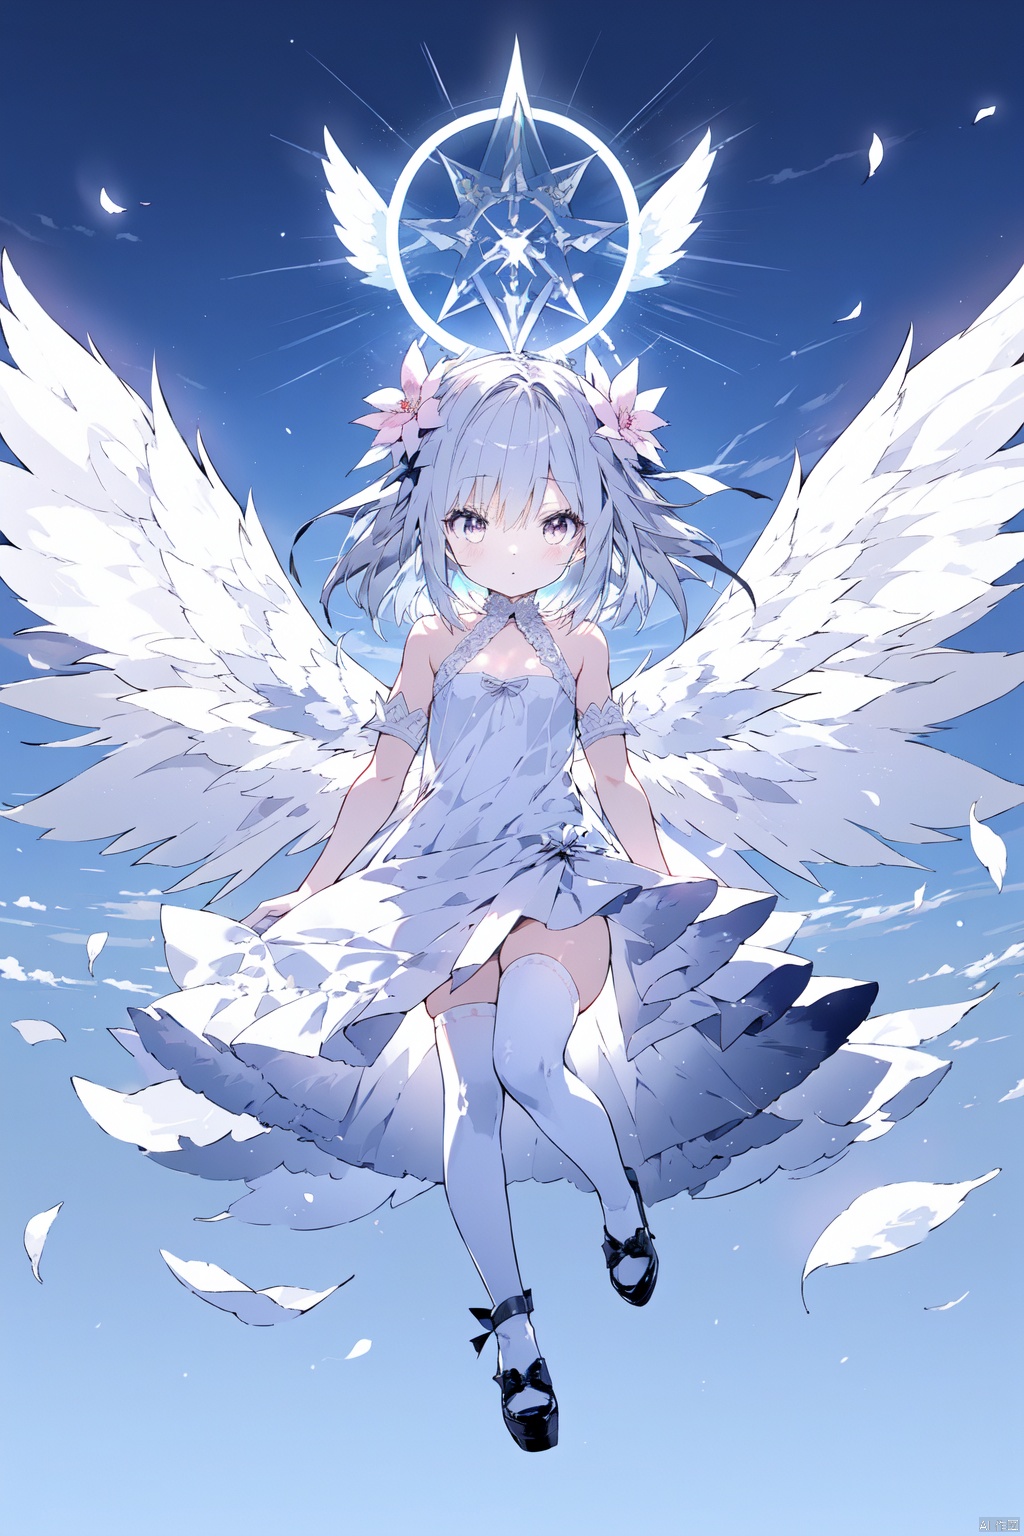 chibi,1girl, alternate_wings, angel, angel_and_devil, angel_wings, asymmetrical_wings, dress, feathered_wings, feathers, flower, full_body, halo, kishin_sagume, large_wings, mini_wings, multicolored_wings, multiple_wings, pegasus, petals, pink_wings, shoes, single_wing, solo, spread_wings, string, string_of_fate, thighhighs, white_dress, white_feathers, white_wings, winged_arms, wings